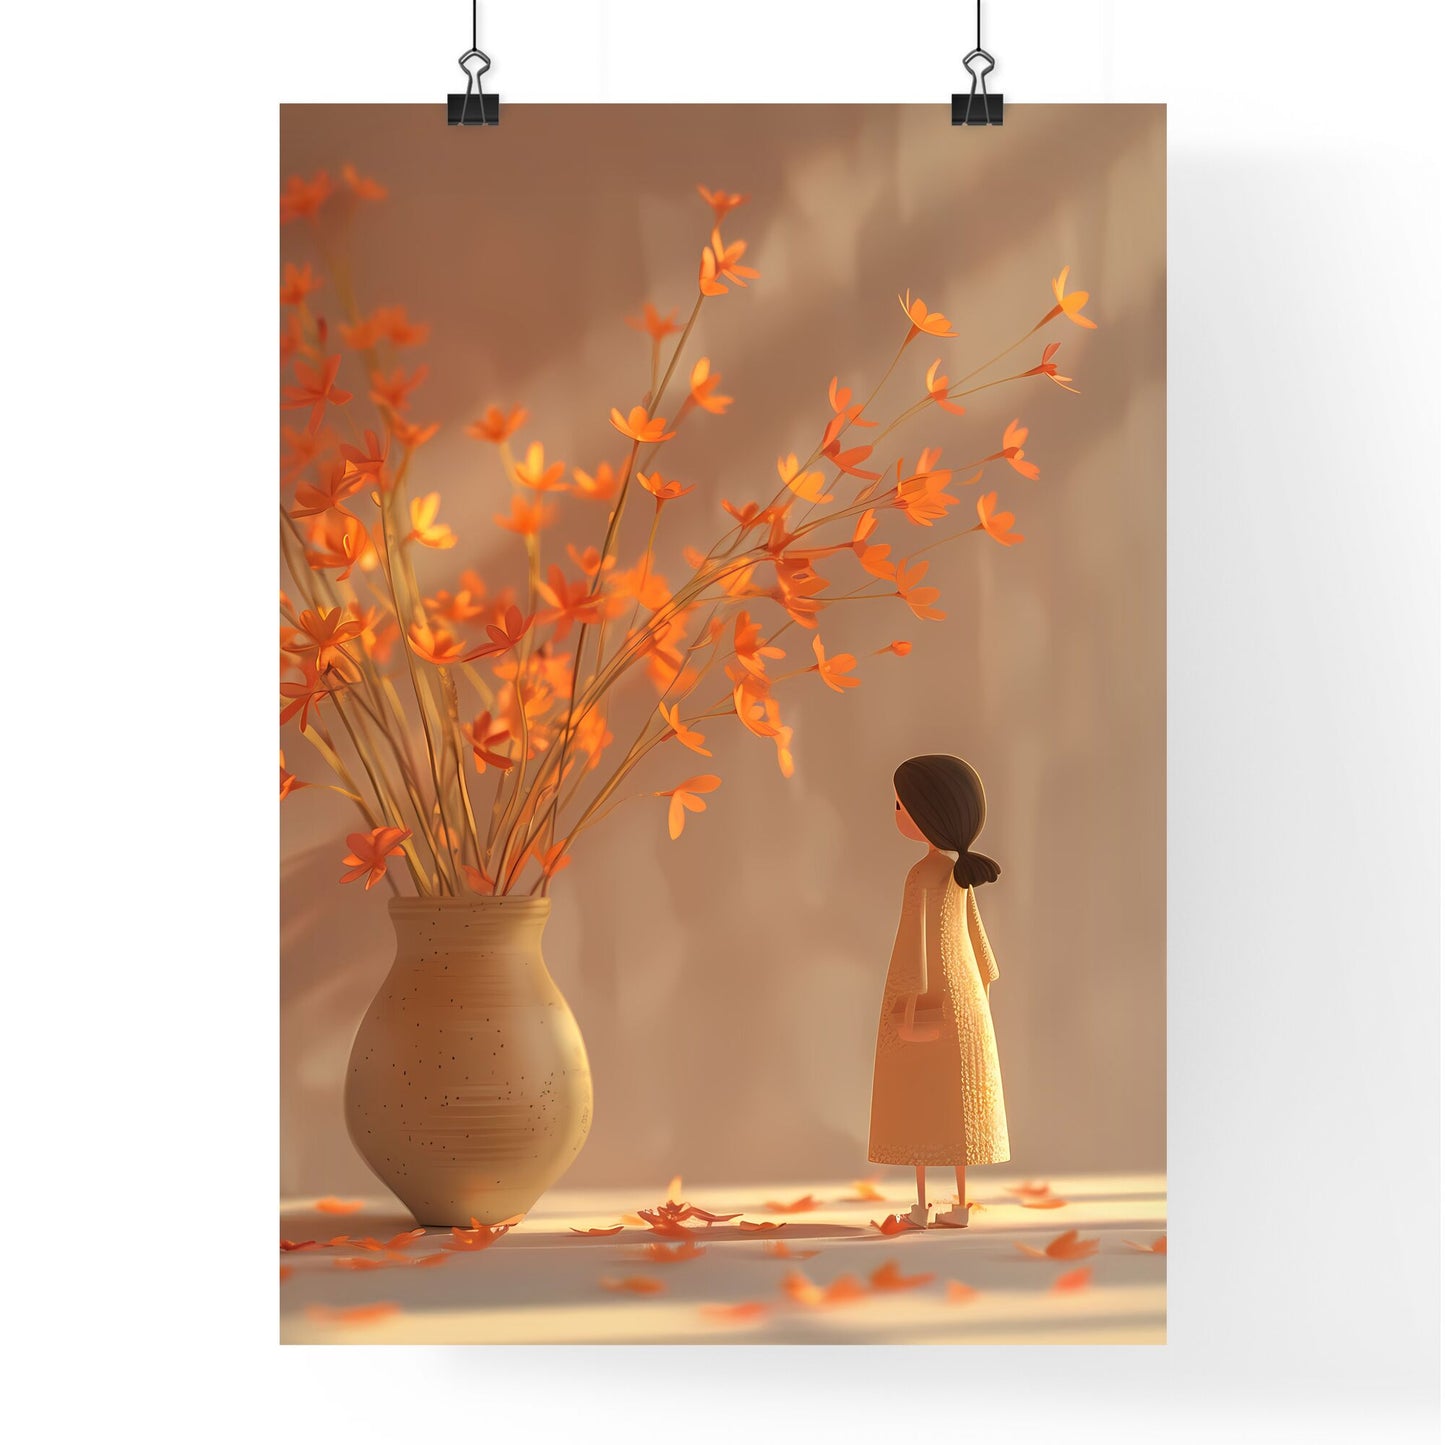 32K UHD minimalist cartoon doll standing next to light orange and pink vase painting with vibrant art focus patty maher lively colorized tableaus Default Title